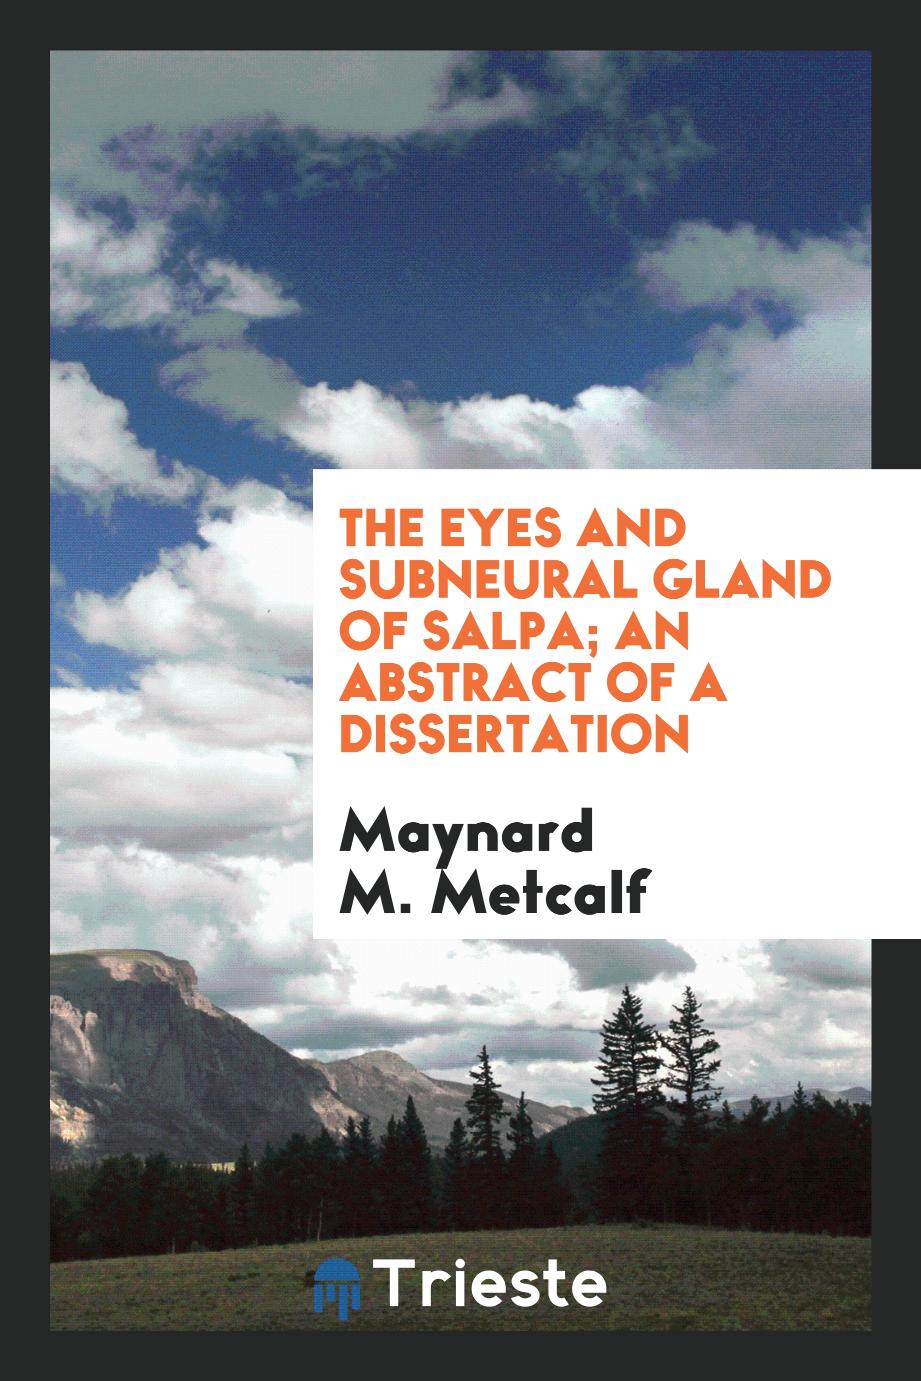 The Eyes and Subneural Gland of Salpa; an abstract of a dissertation